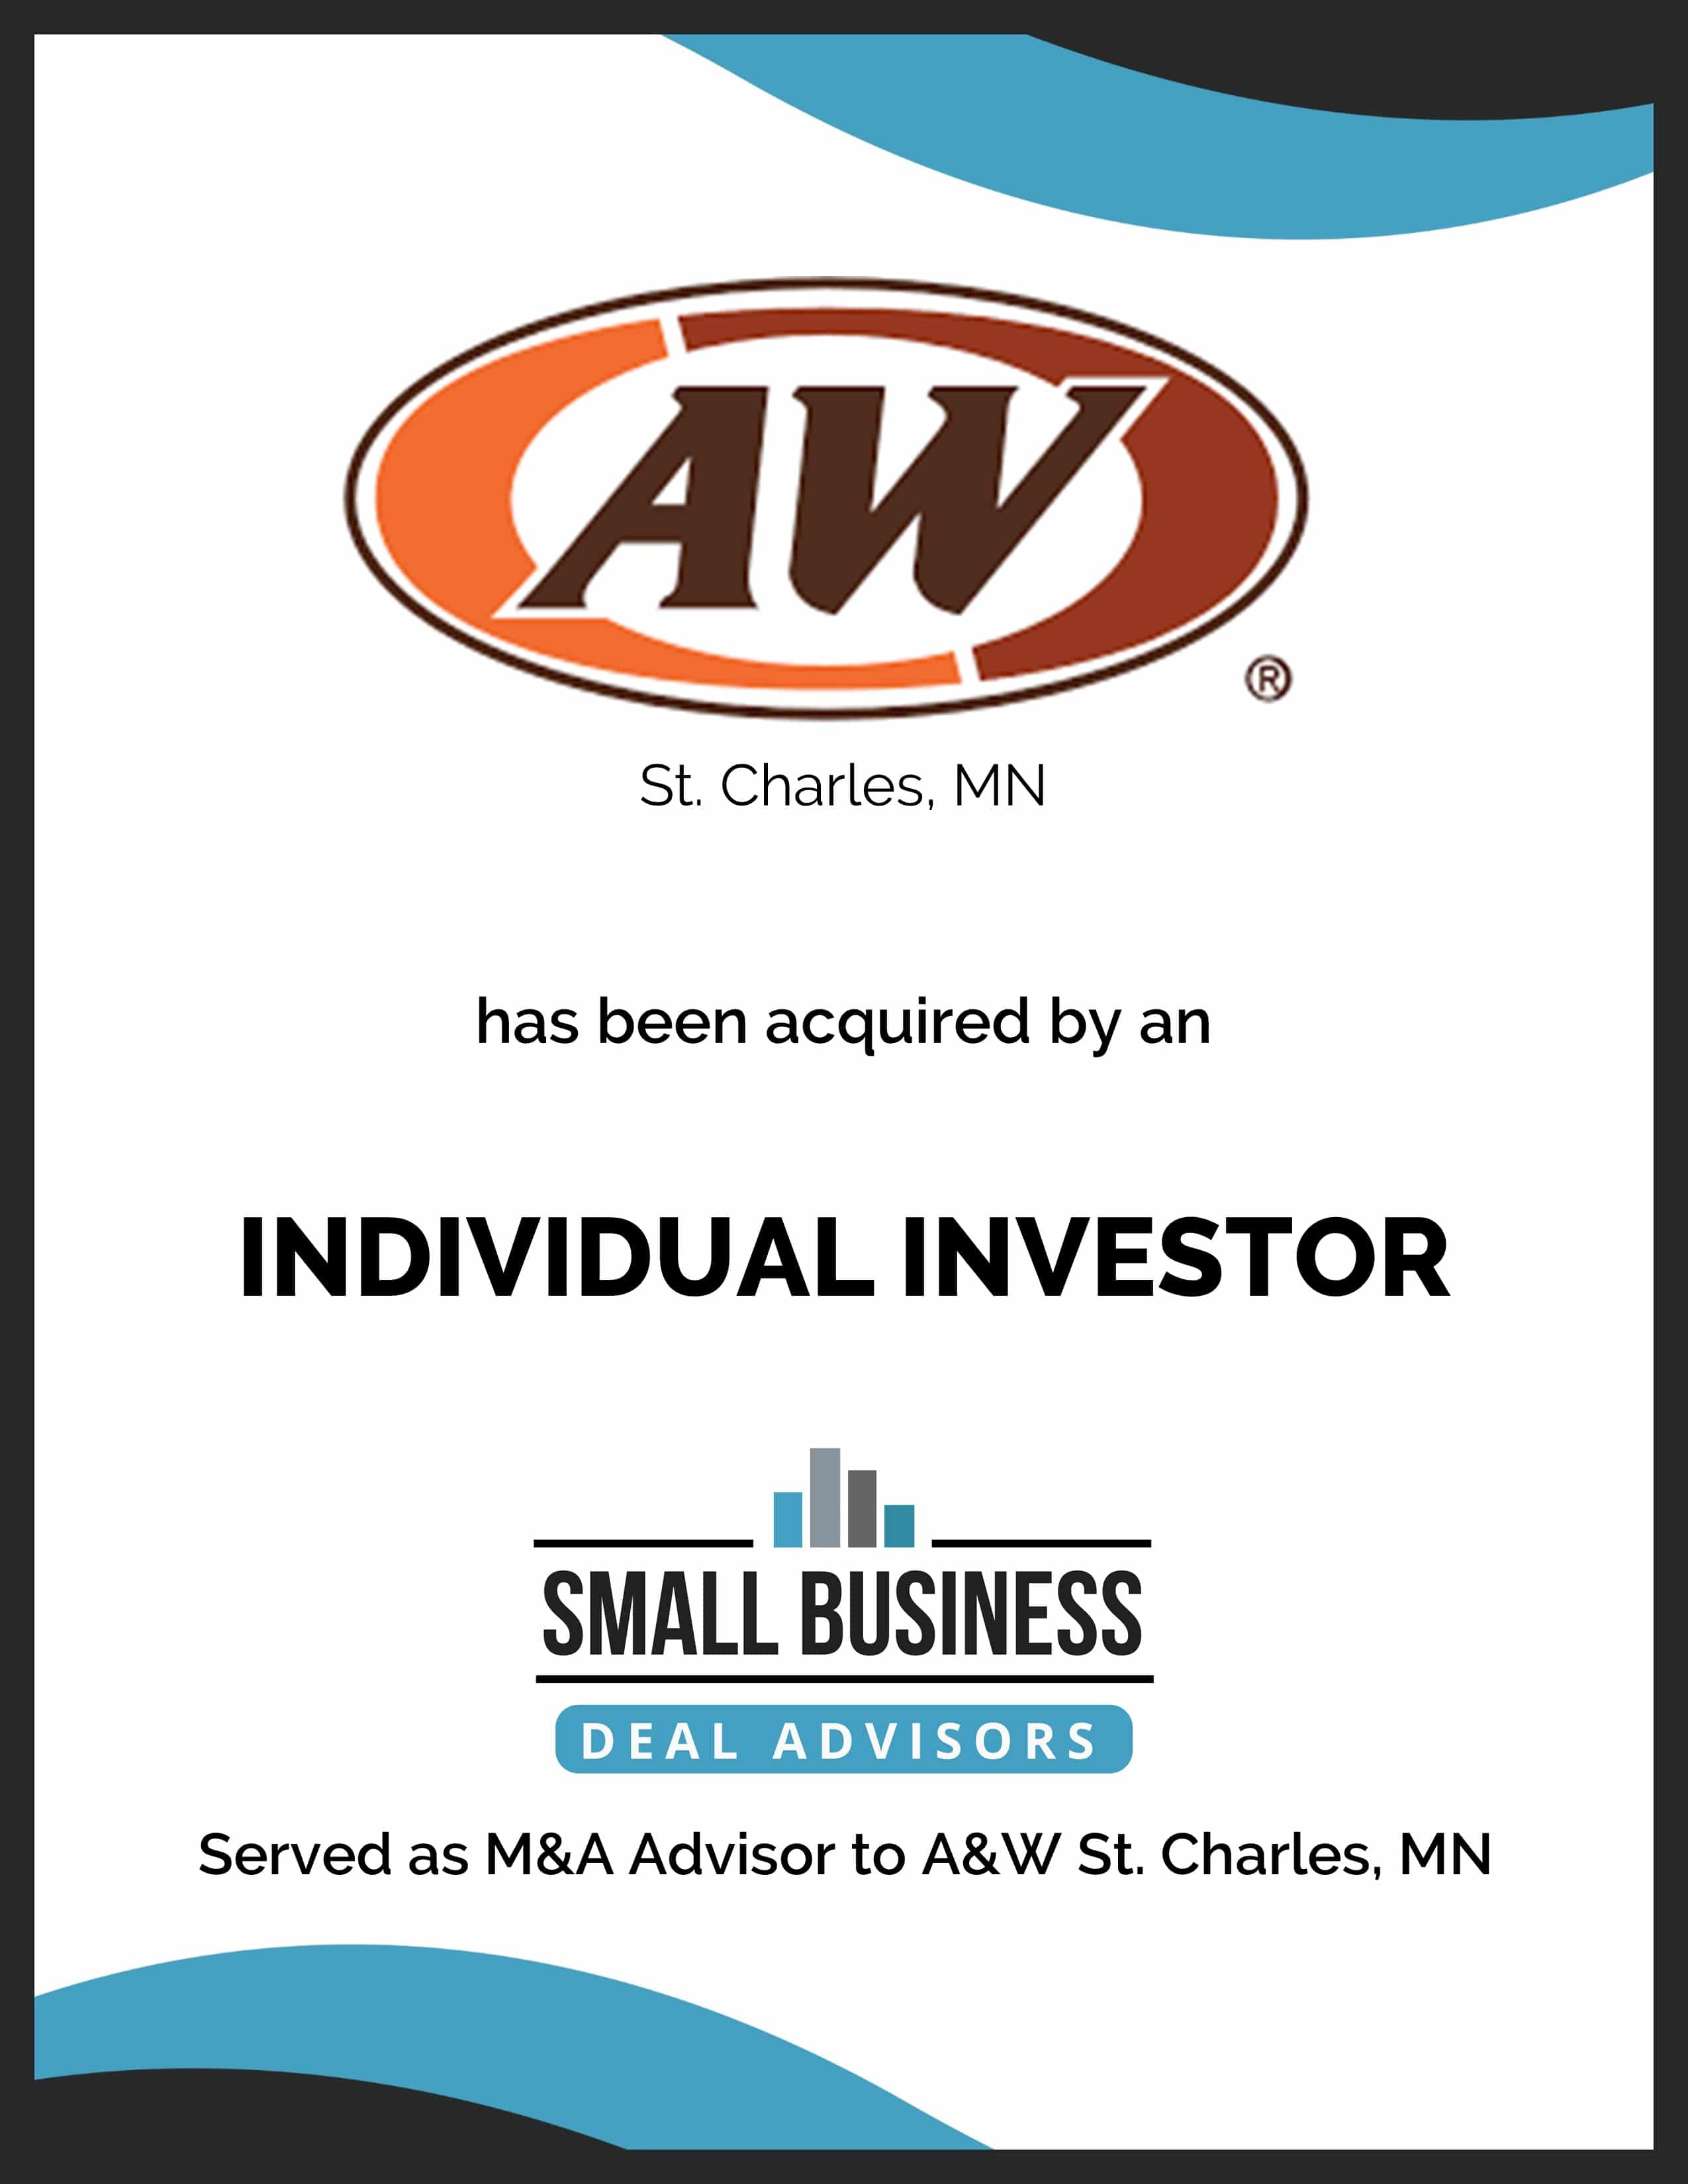 A&W St. Charles MN sold to an individual investor